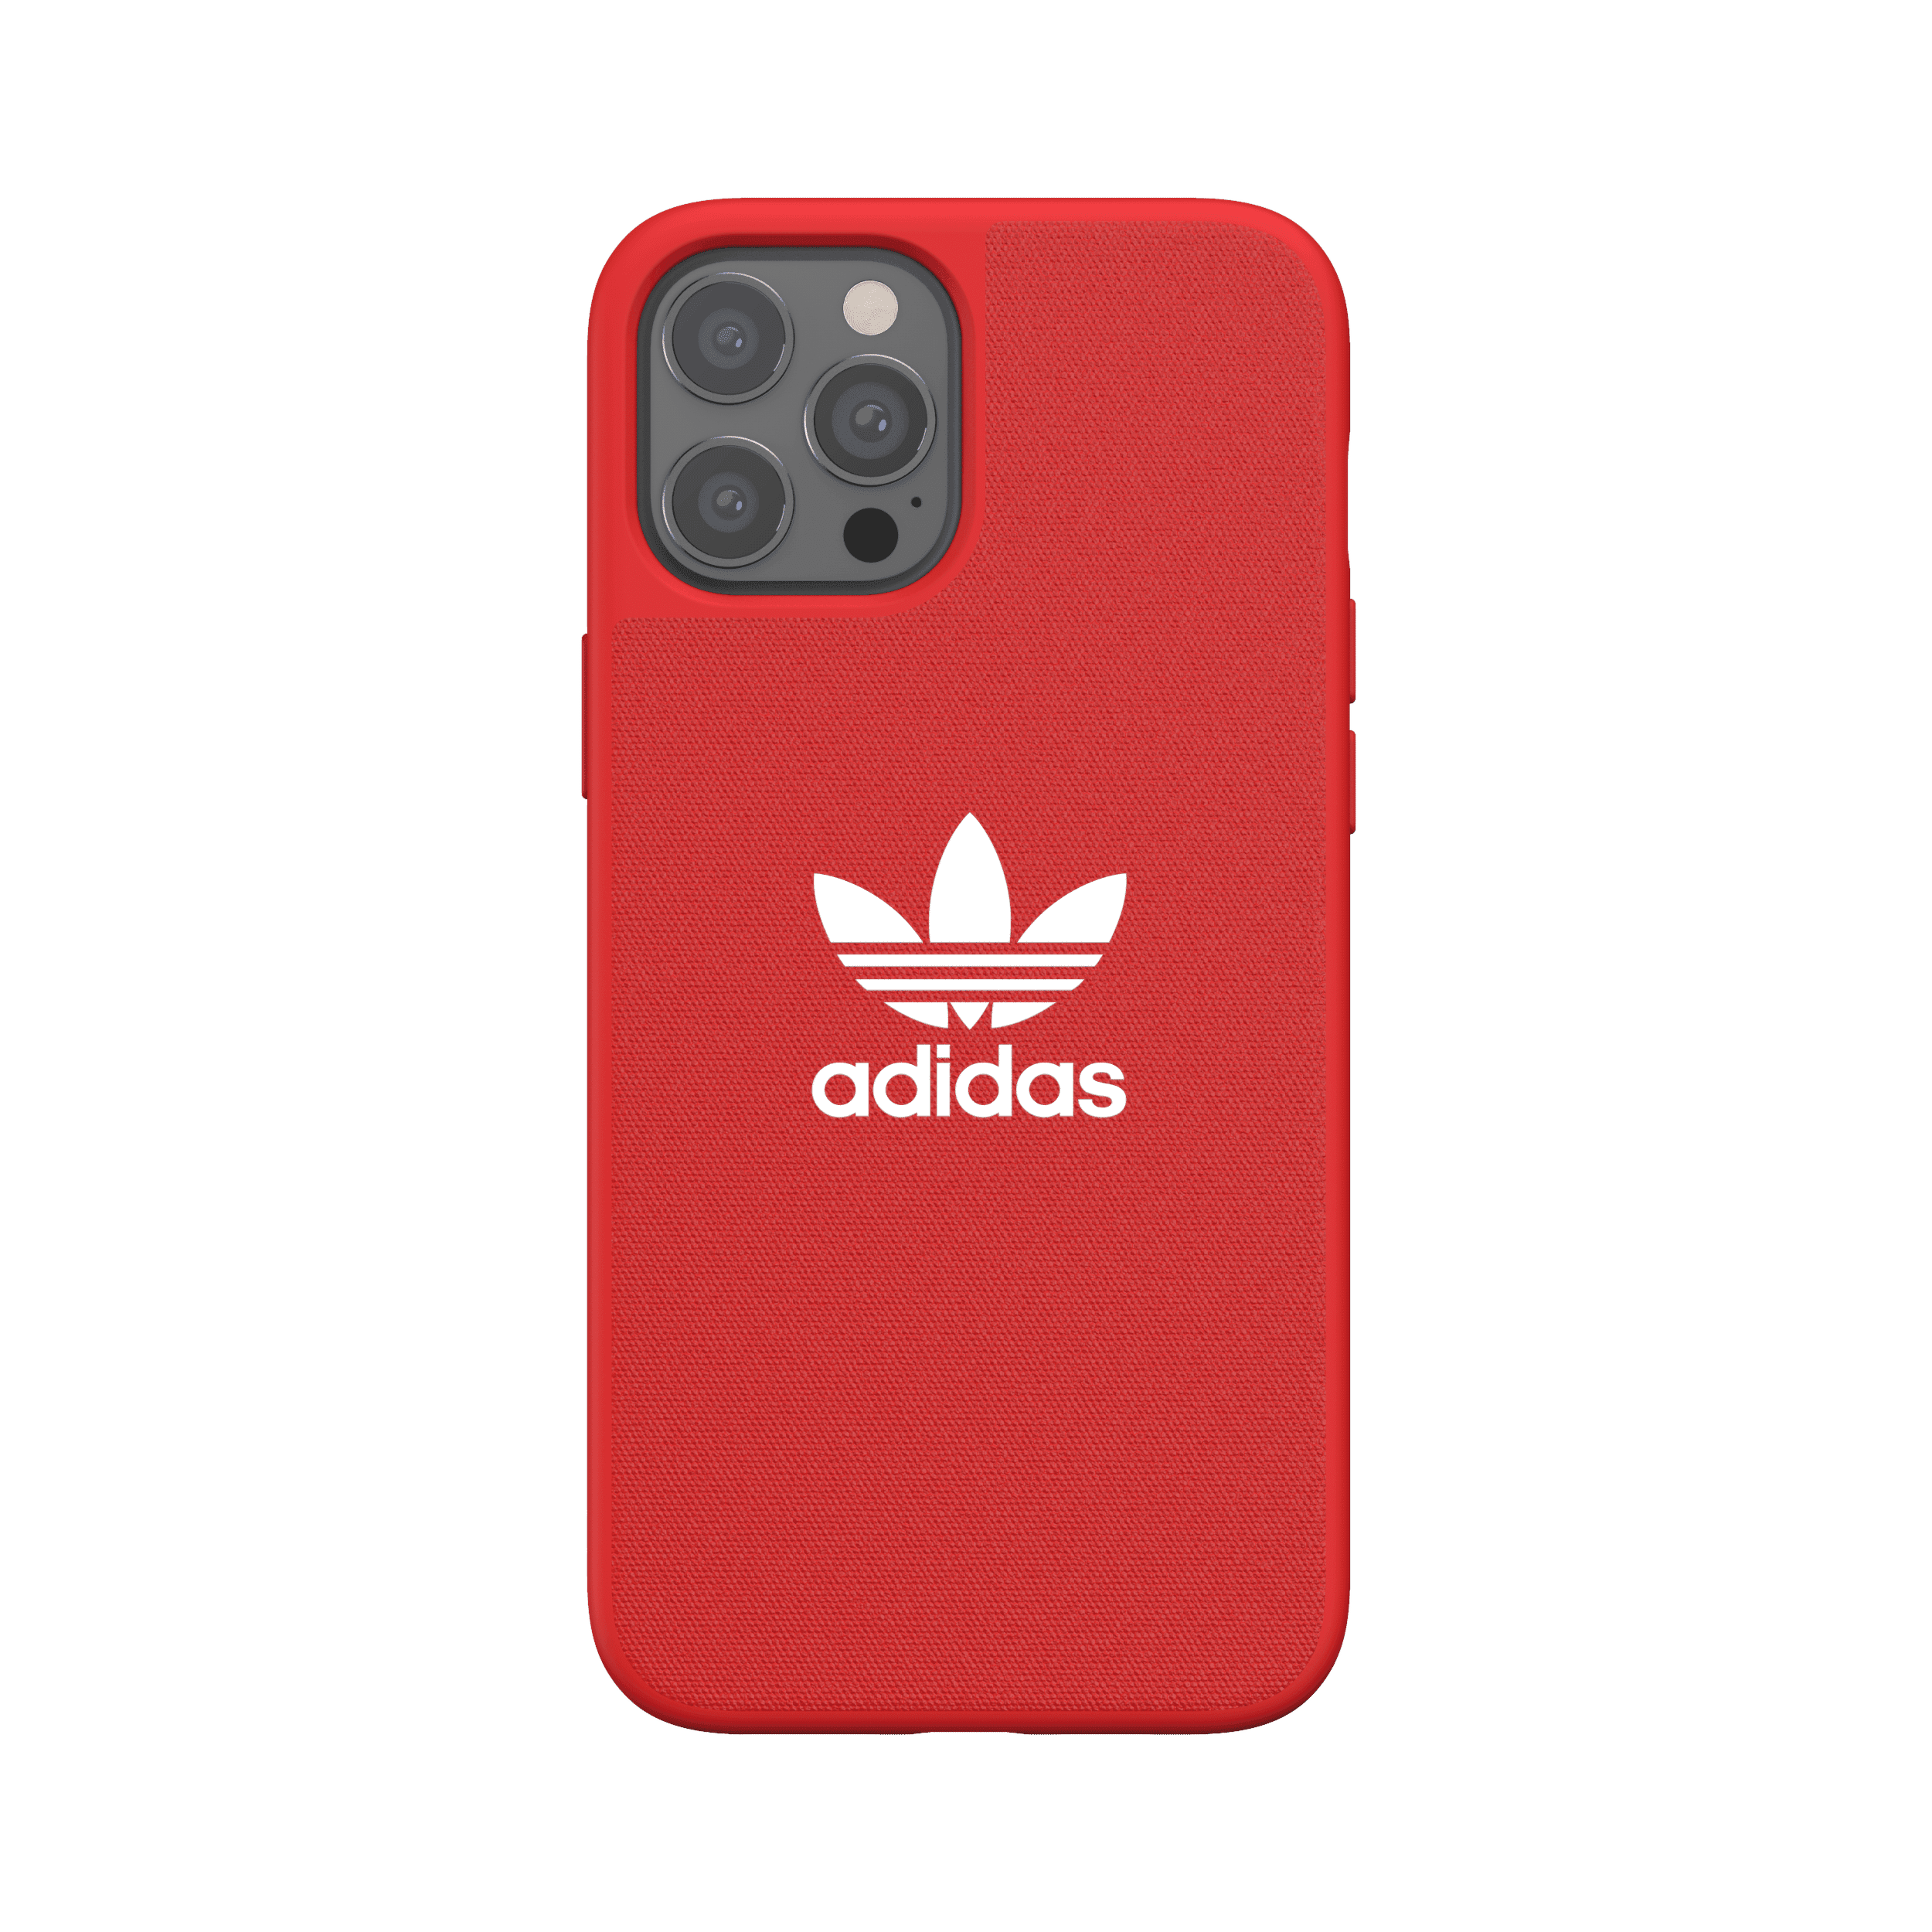 adidas originals apple iphone 12 pro max canvas case back cover w trefoil design scratch drop protection w tpu bumper wireless charging compatible scarlet